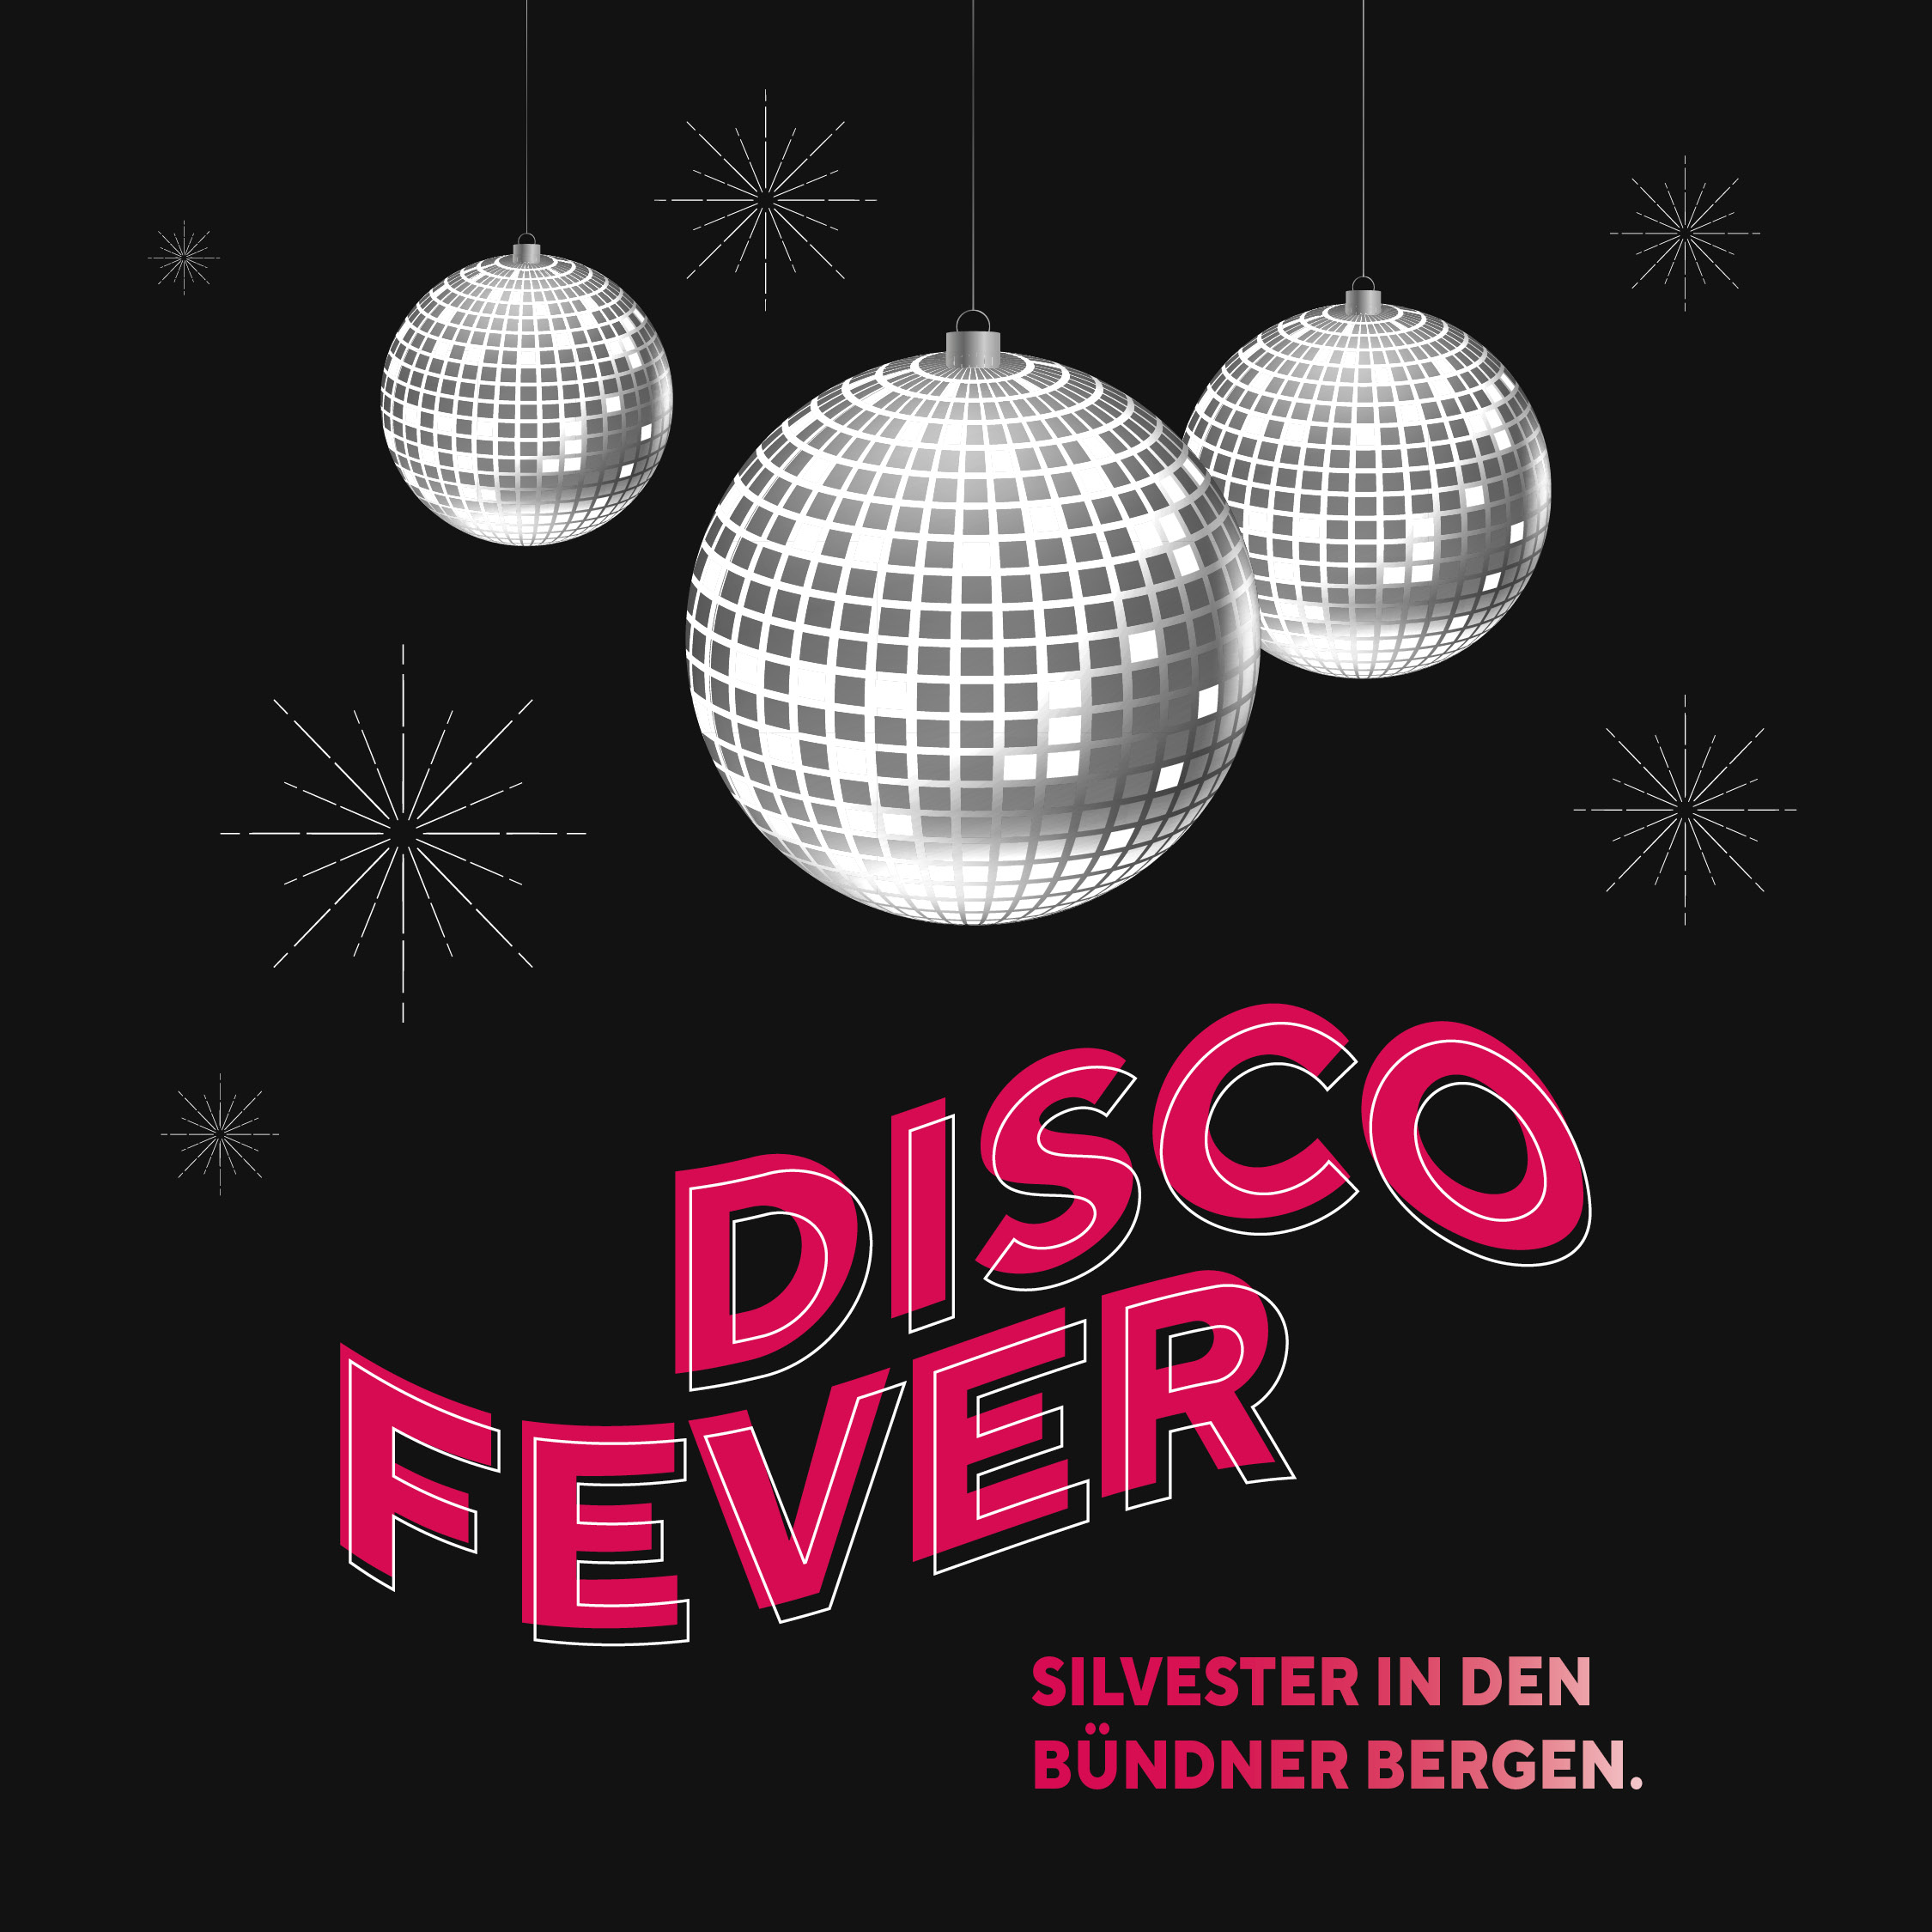 New Year's Eve Gala Dinner - Disco Fever